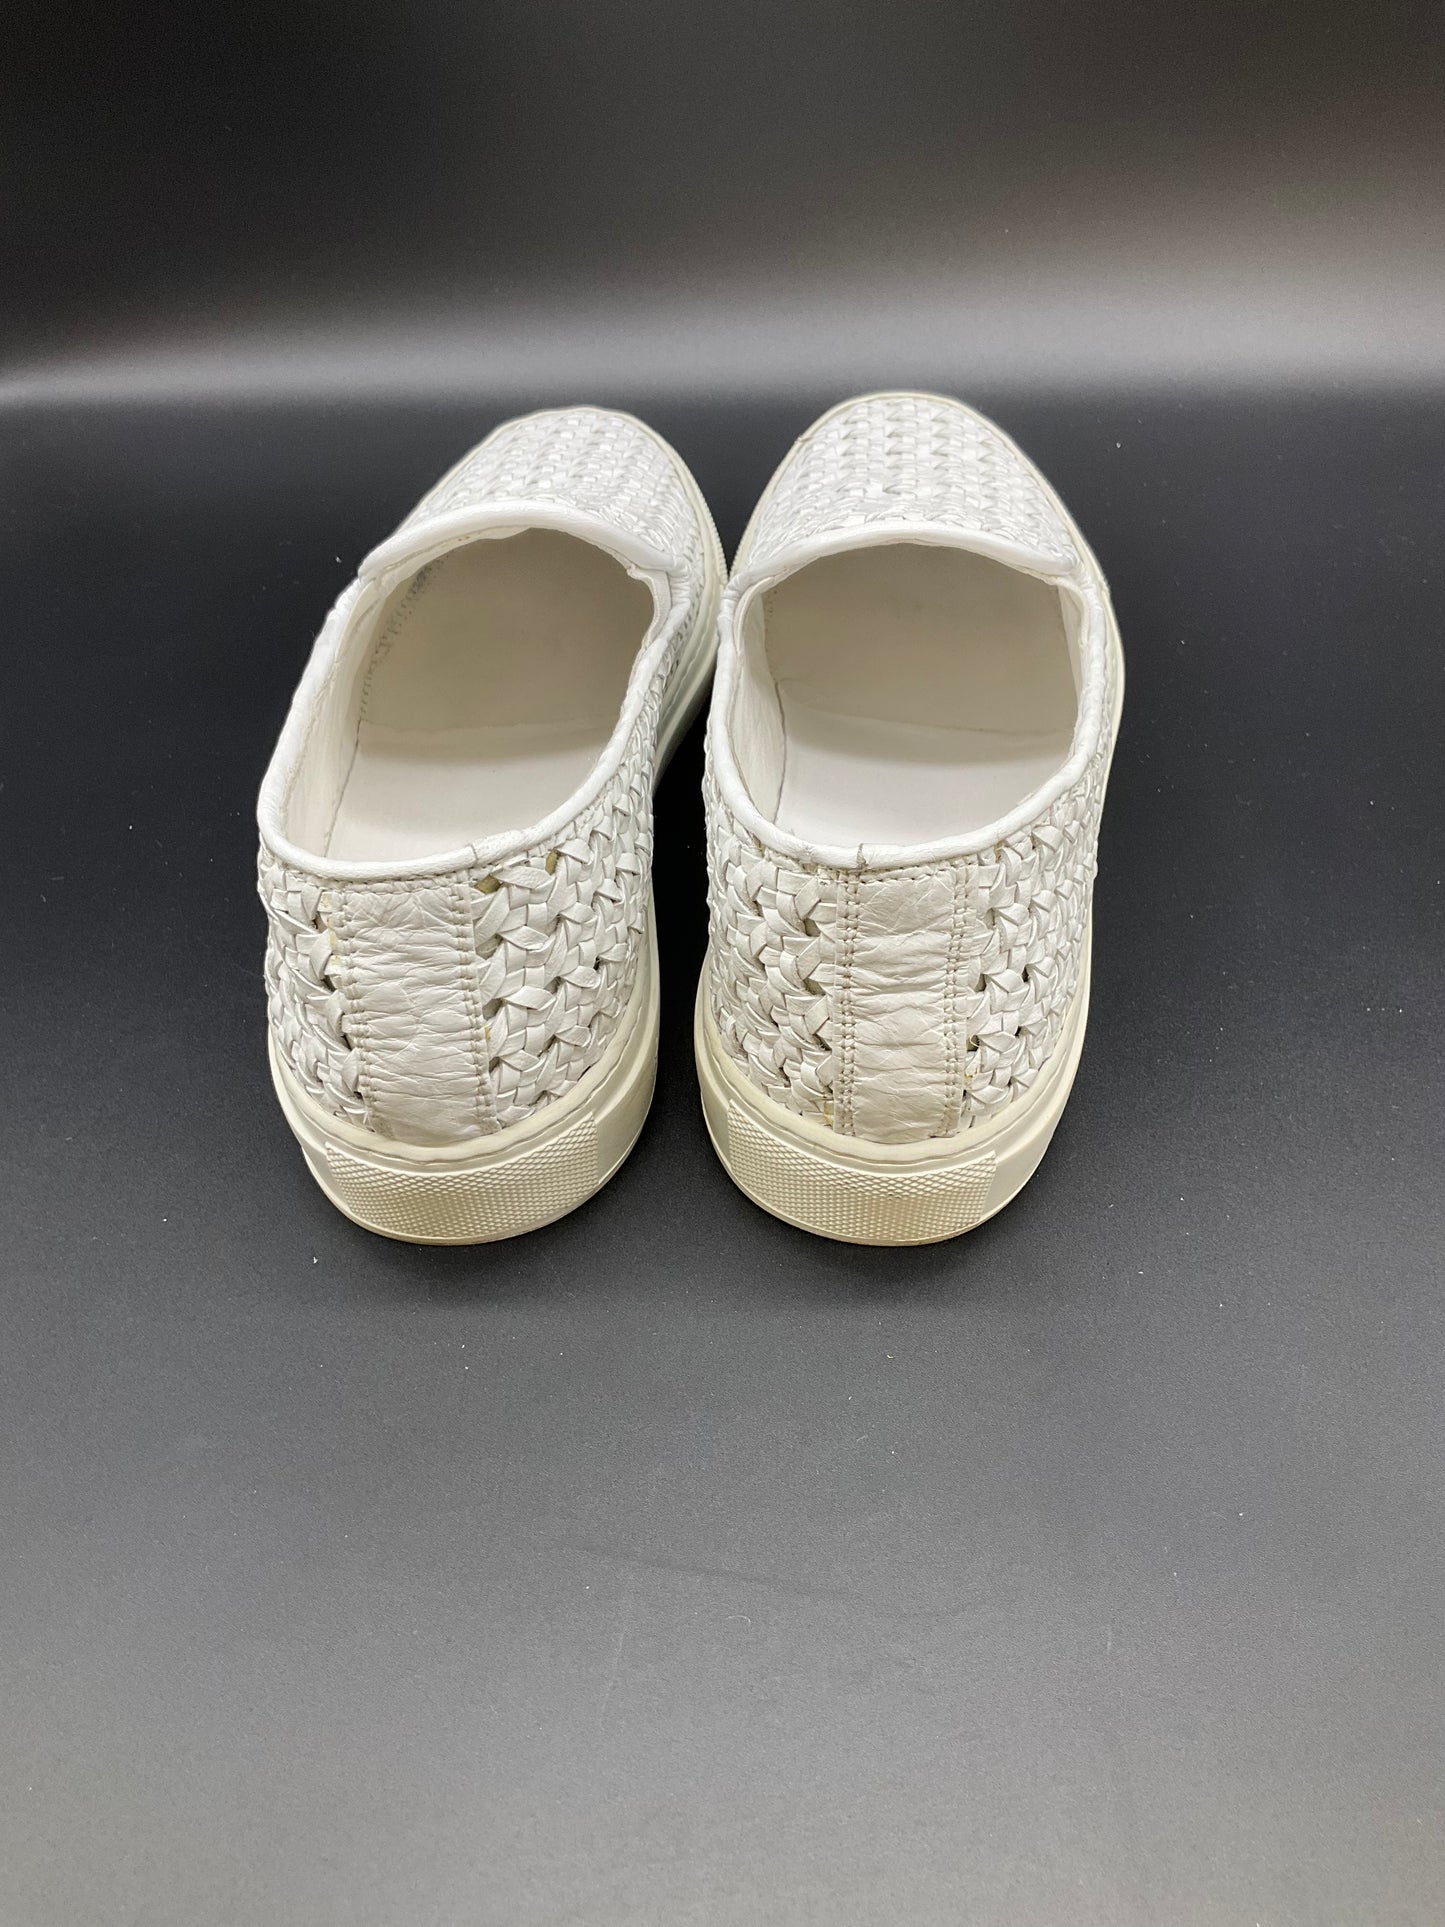 Rocco P White Slip On Sneakers Size 40